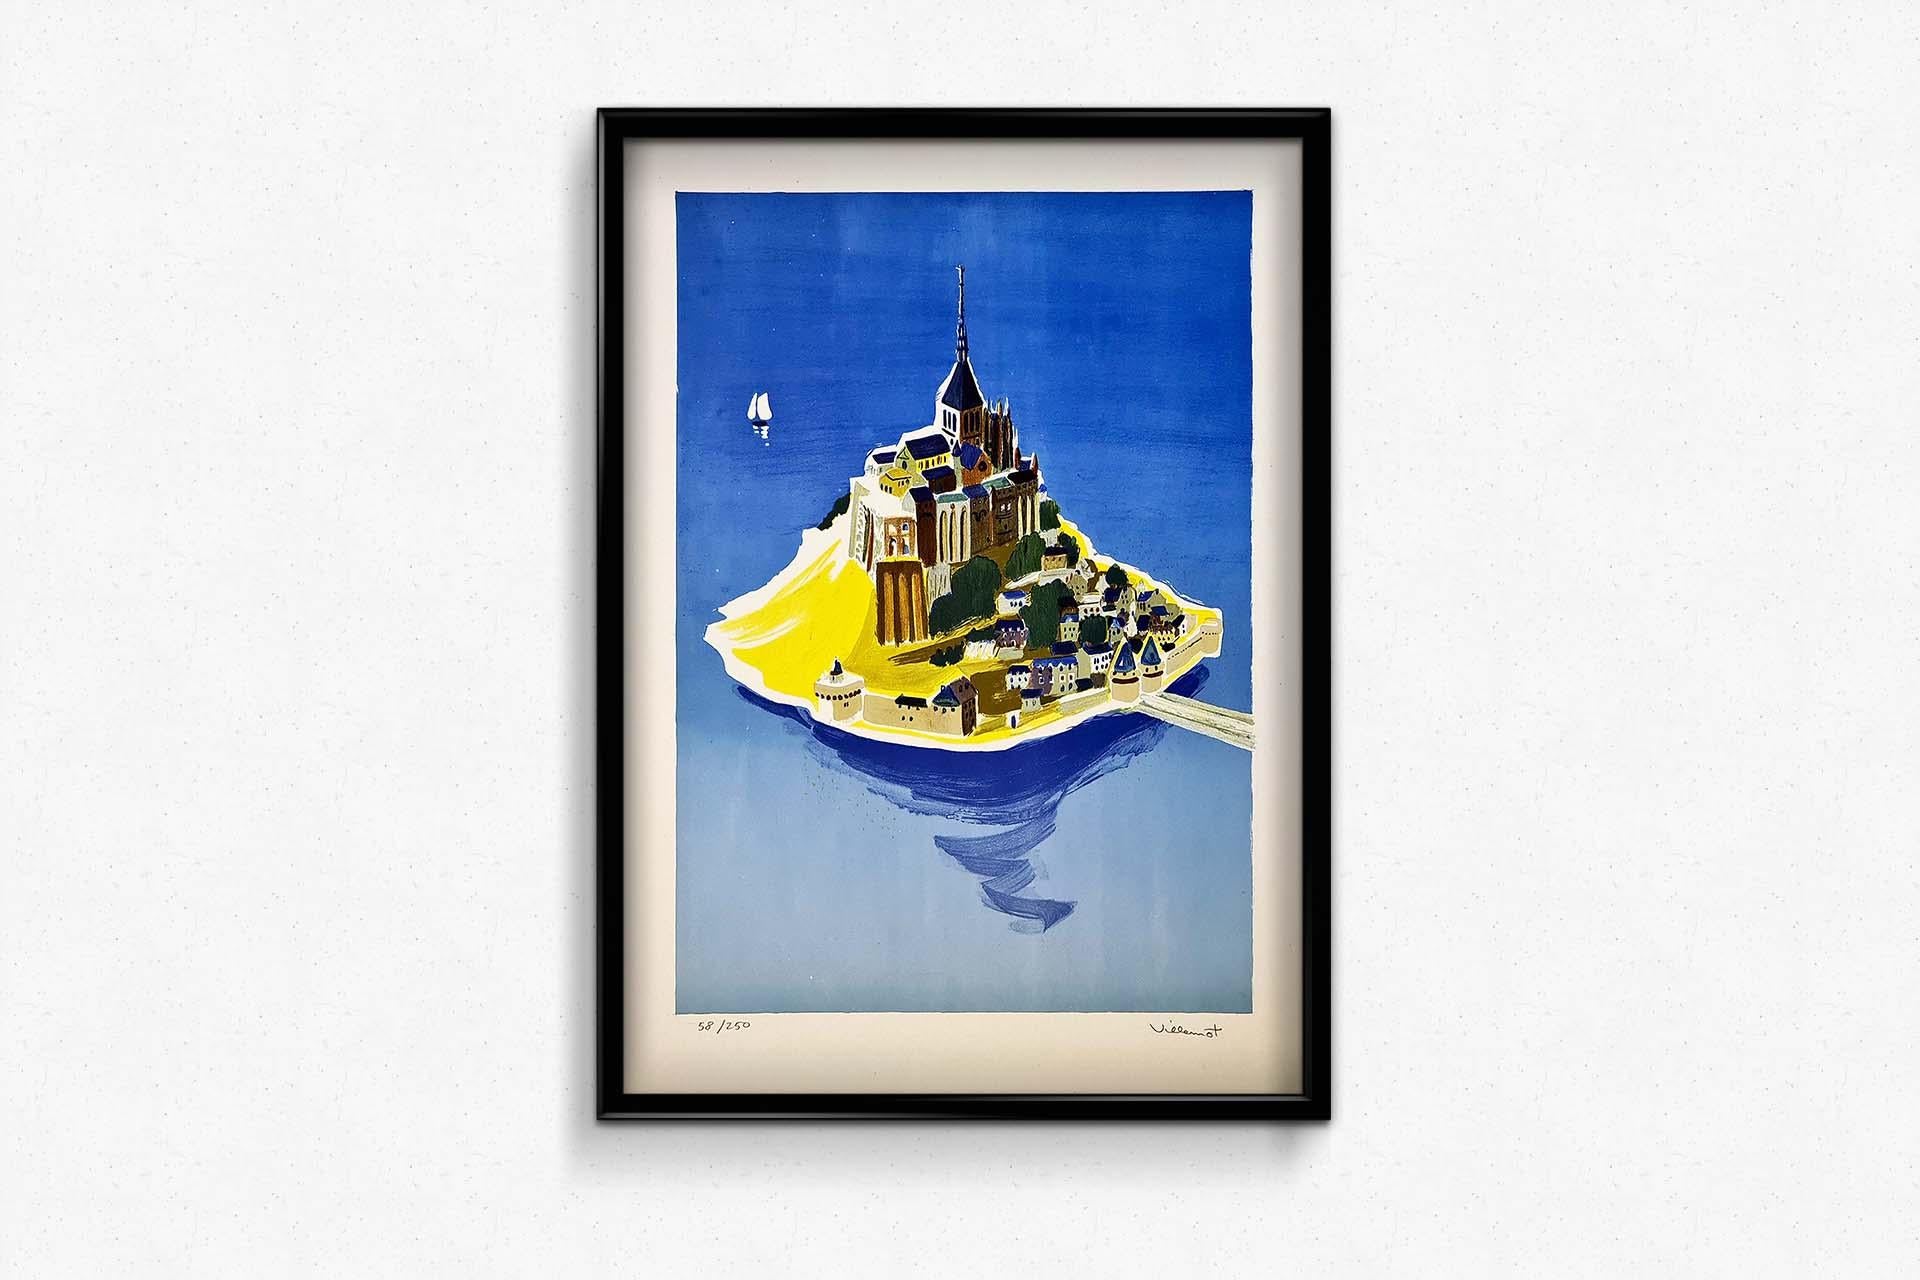 Original Lithograph numbered and signed by Bernard Villemot. In 1955, Bernard Villemot produced this lithograph for the SNCF to promote tourism in Mont Saint Michel.
The artist's refined drawing style is recognizable here as he depicts the Norman